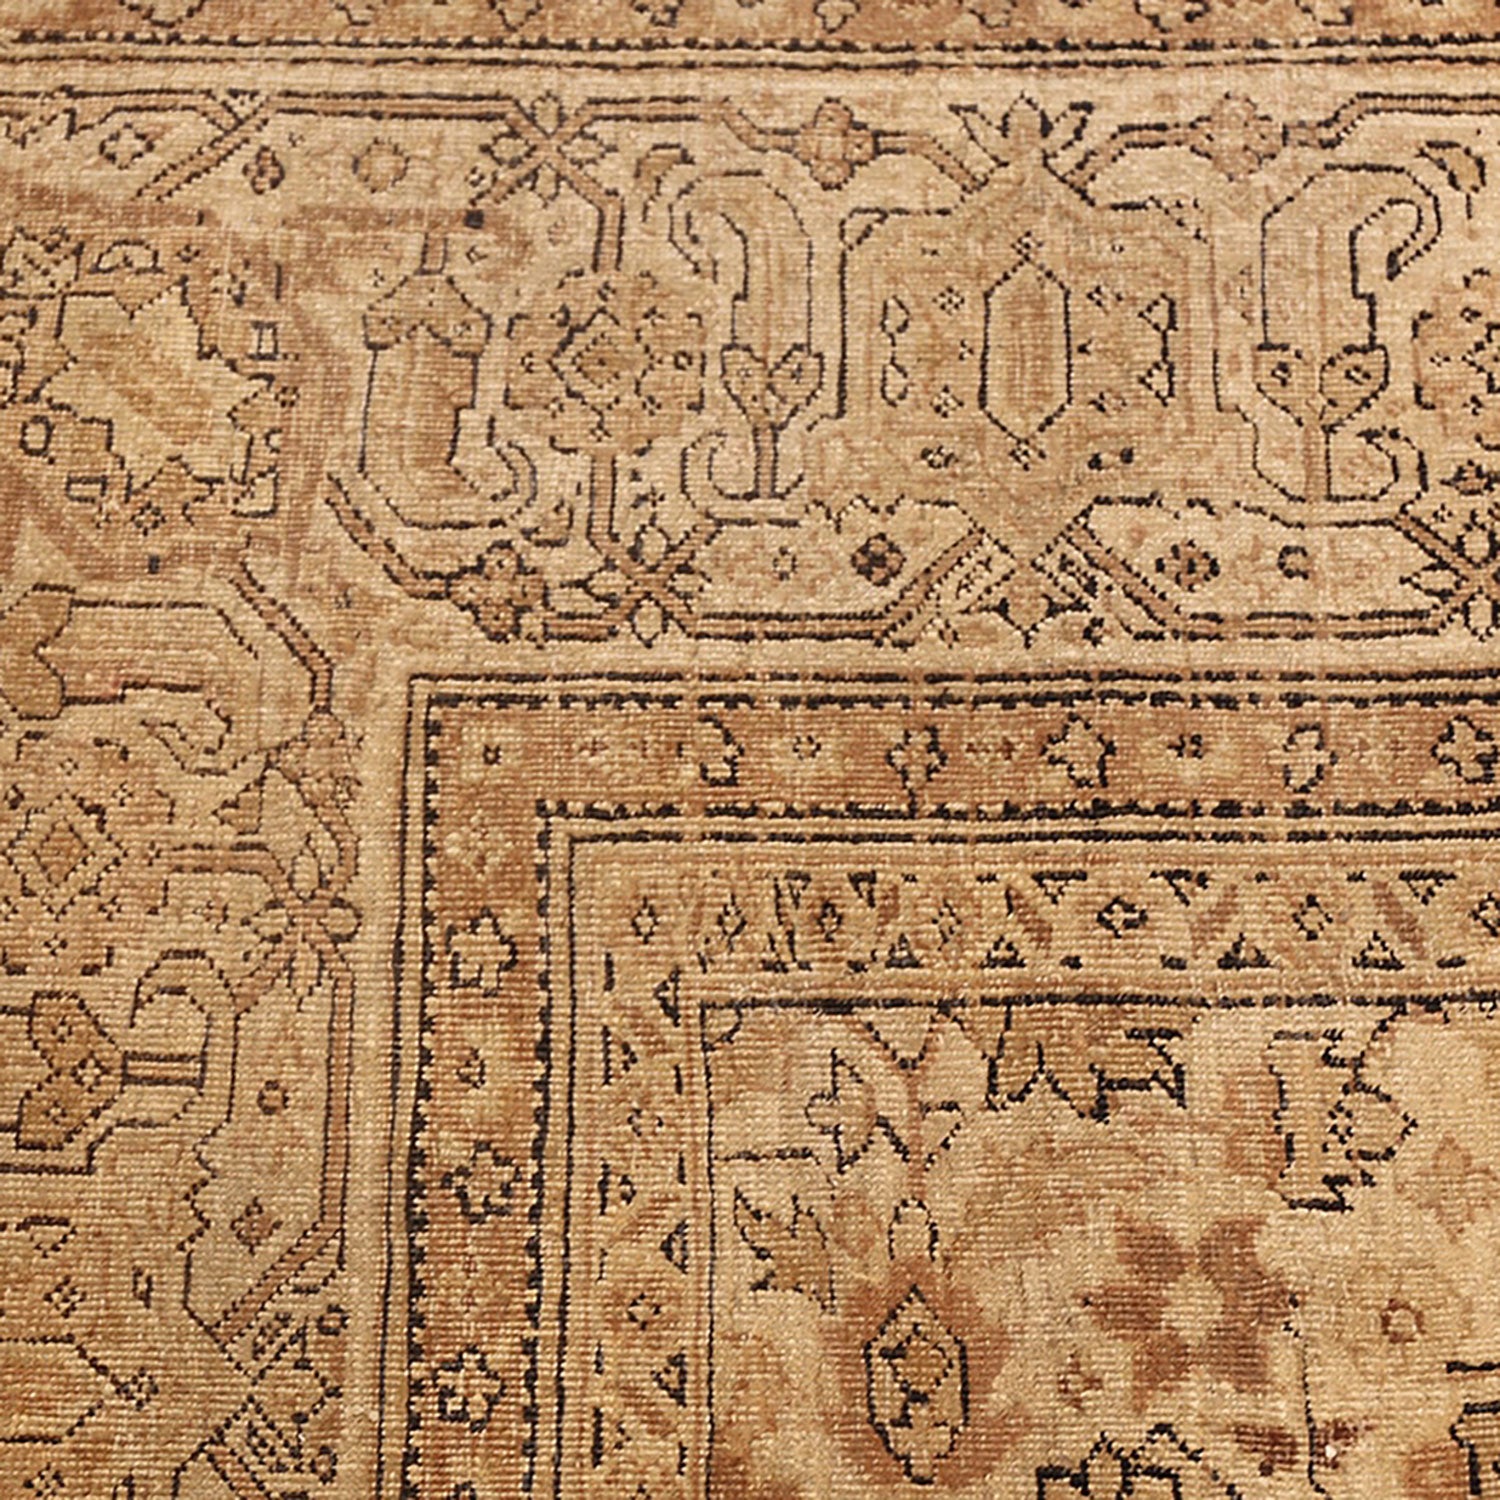 An intricate, handmade rug with traditional motifs in earthy tones.